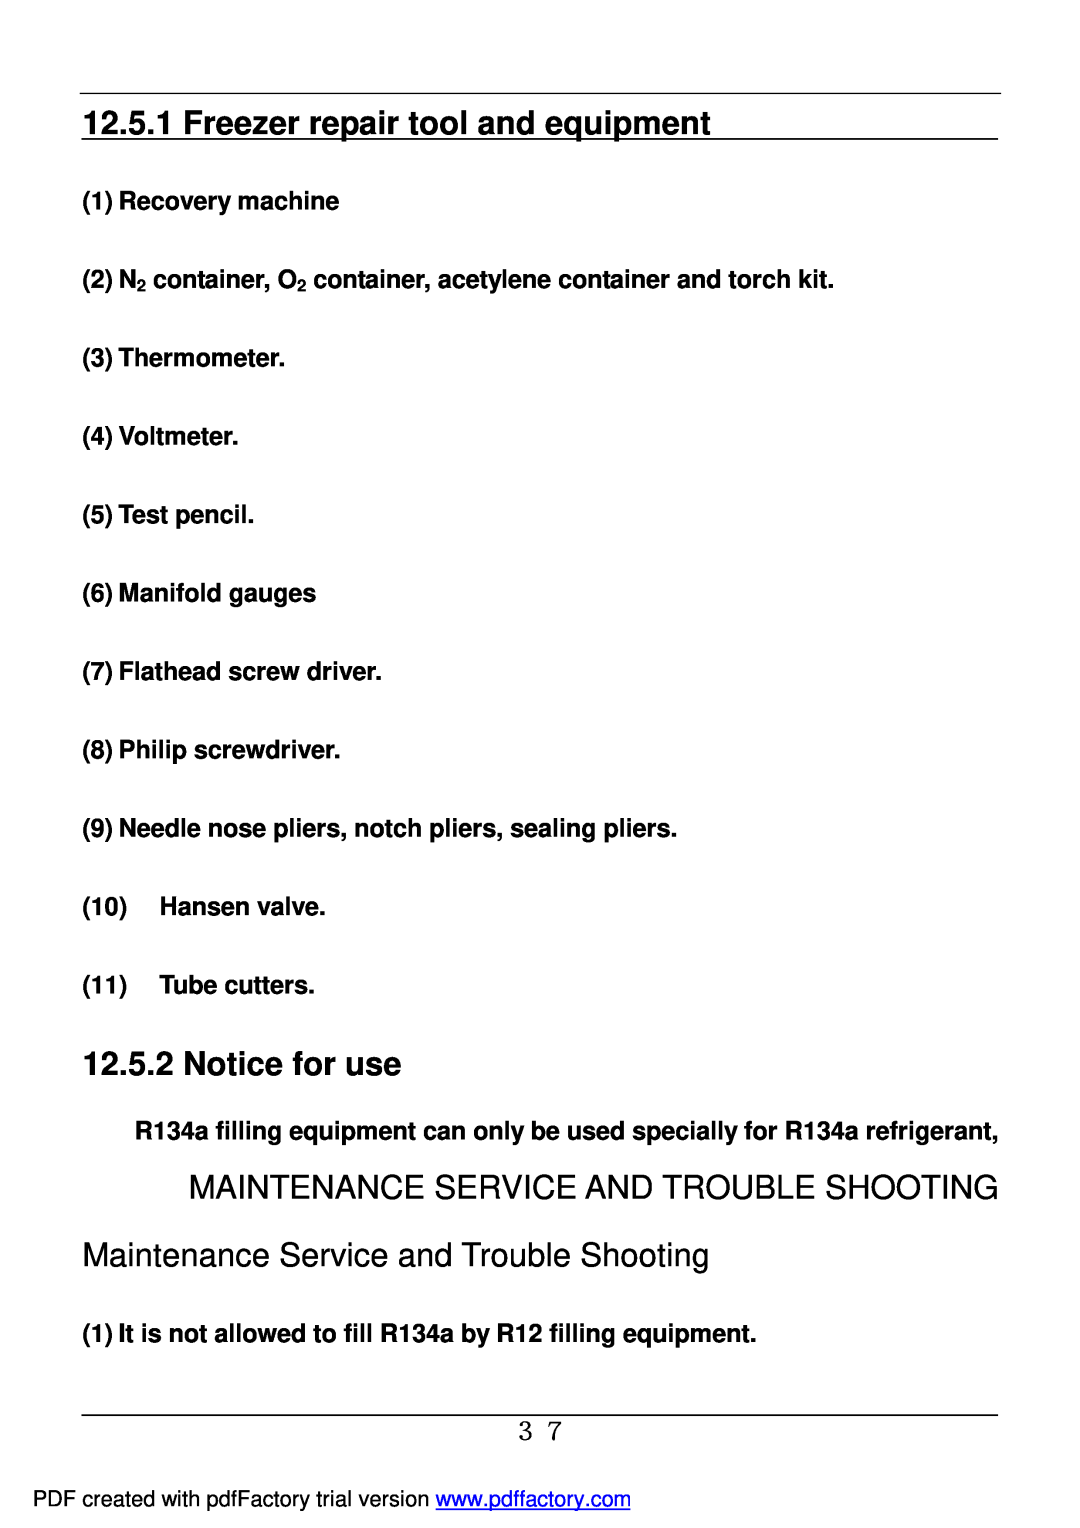 Haier BD-478A service manual Freezer repair tool and equipment, Notice for use, Maintenance Service And Trouble Shooting 